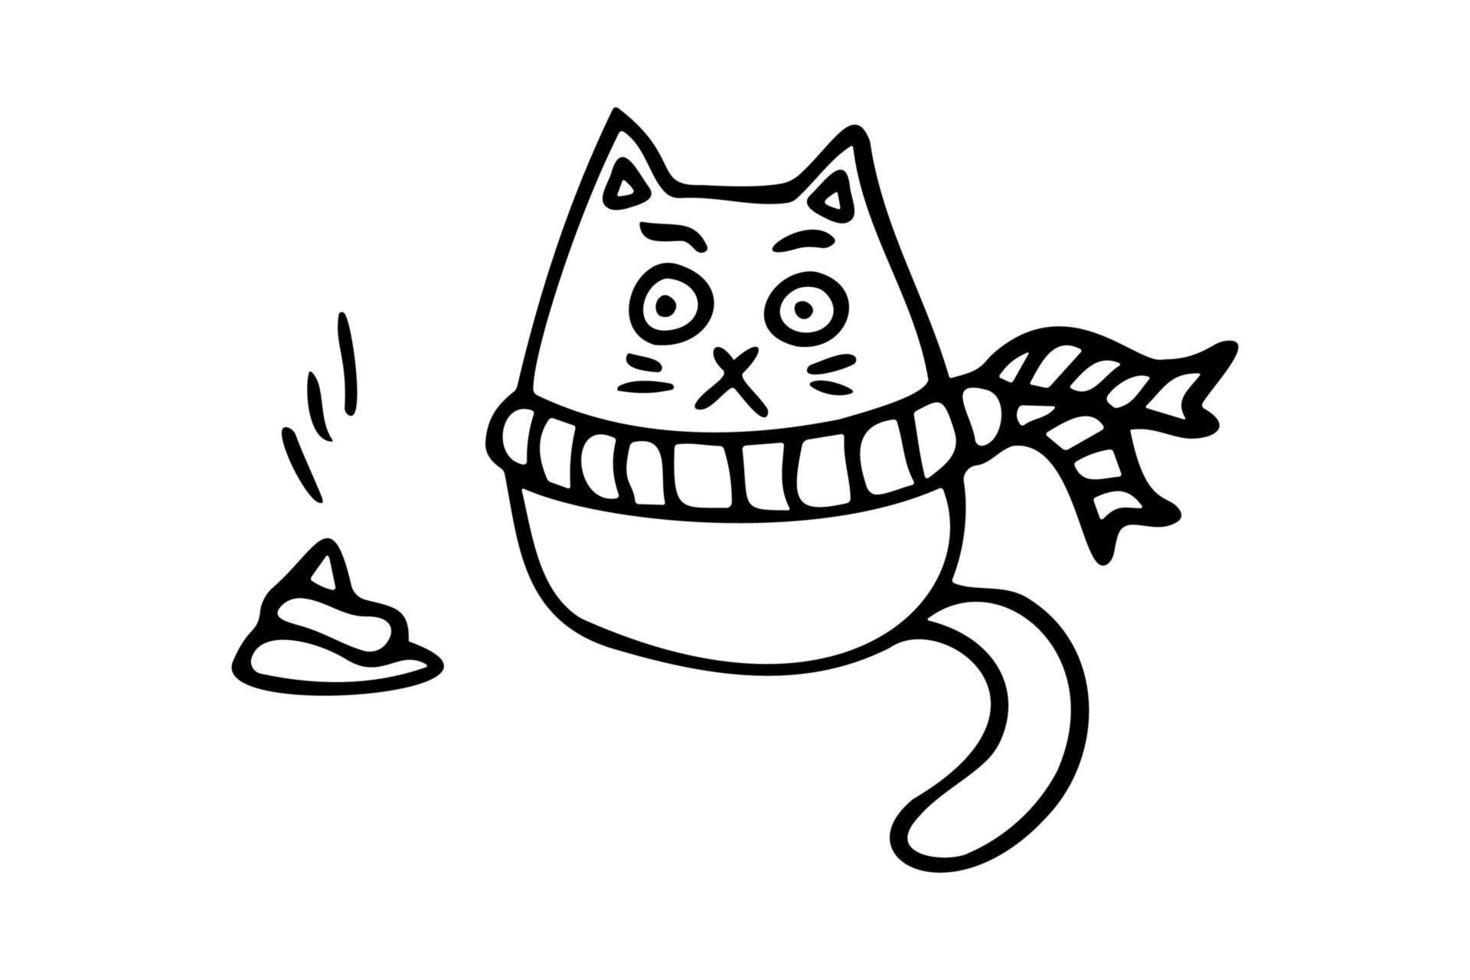 Doodle illustration of a cat in a scarf looks at the poop with surprise. vector illustration